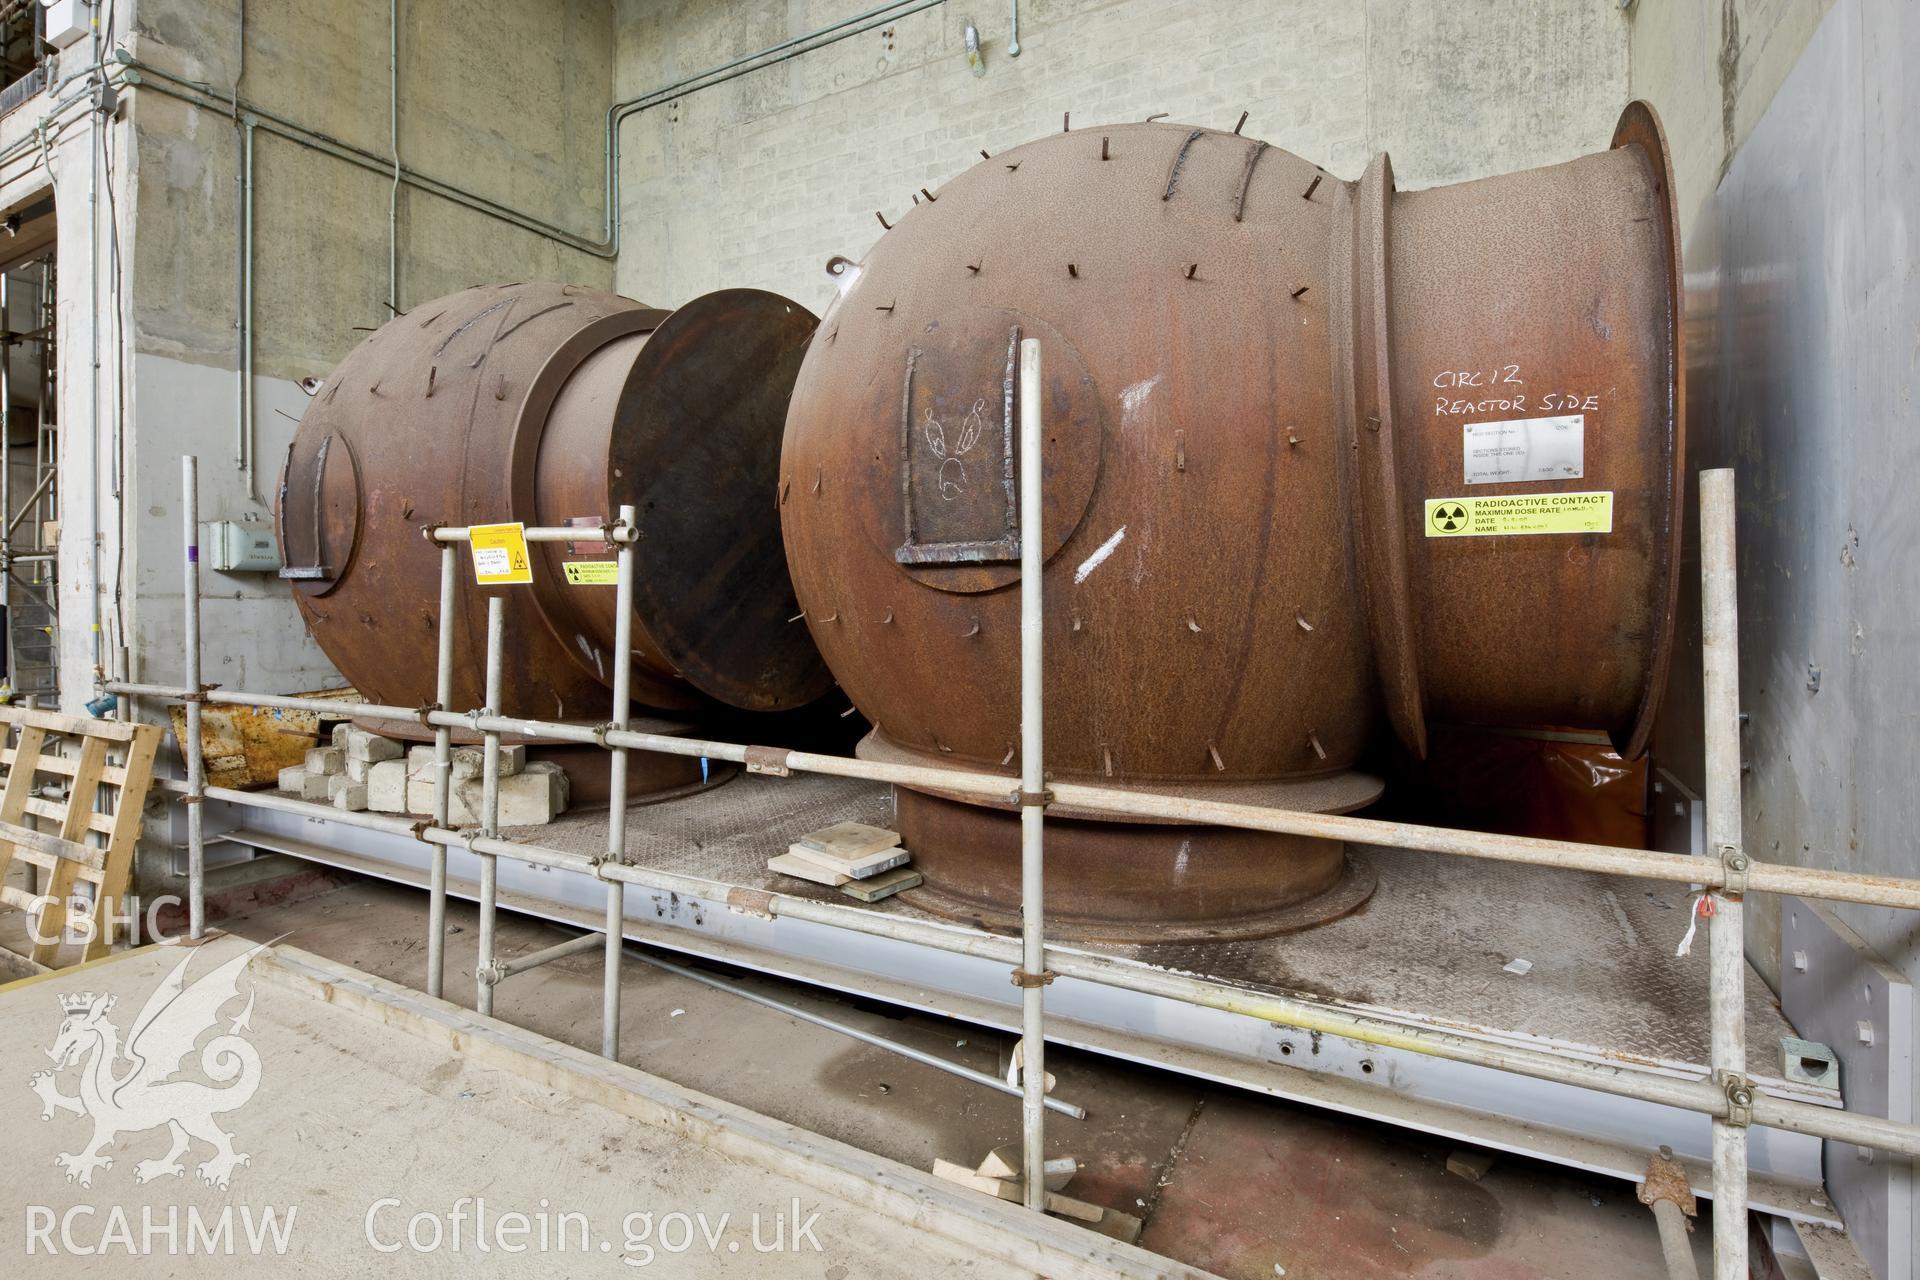 Sections of the boilers which have been cut apart to help reduce the height of the reactors.